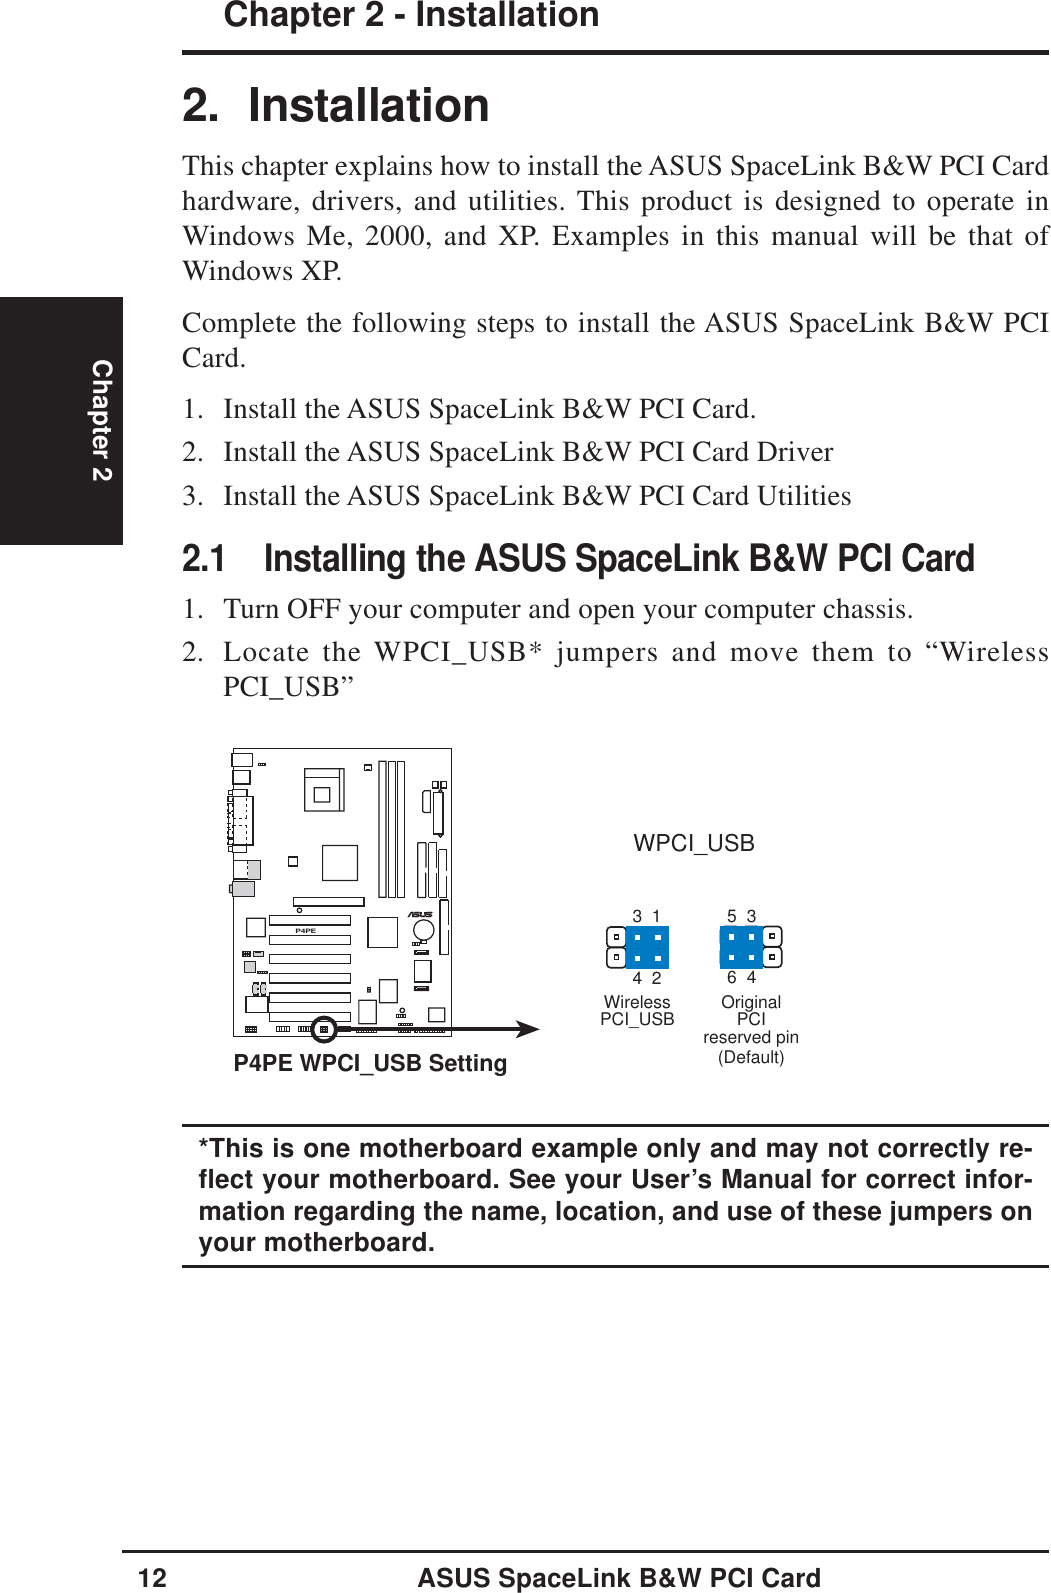 12 ASUS SpaceLink B&amp;W PCI CardChapter 2 - InstallationChapter 22. InstallationThis chapter explains how to install the ASUS SpaceLink B&amp;W PCI Cardhardware, drivers, and utilities. This product is designed to operate inWindows Me, 2000, and XP. Examples in this manual will be that ofWindows XP.Complete the following steps to install the ASUS SpaceLink B&amp;W PCICard.1. Install the ASUS SpaceLink B&amp;W PCI Card.2. Install the ASUS SpaceLink B&amp;W PCI Card Driver3. Install the ASUS SpaceLink B&amp;W PCI Card Utilities2.1 Installing the ASUS SpaceLink B&amp;W PCI Card1. Turn OFF your computer and open your computer chassis.2. Locate the WPCI_USB* jumpers and move them to “WirelessPCI_USB”P4PE®P4PE WPCI_USB SettingWPCI_USBWirelessPCI_USB(Default)35461324OriginalPCIreserved pin*This is one motherboard example only and may not correctly re-flect your motherboard. See your User’s Manual for correct infor-mation regarding the name, location, and use of these jumpers onyour motherboard.